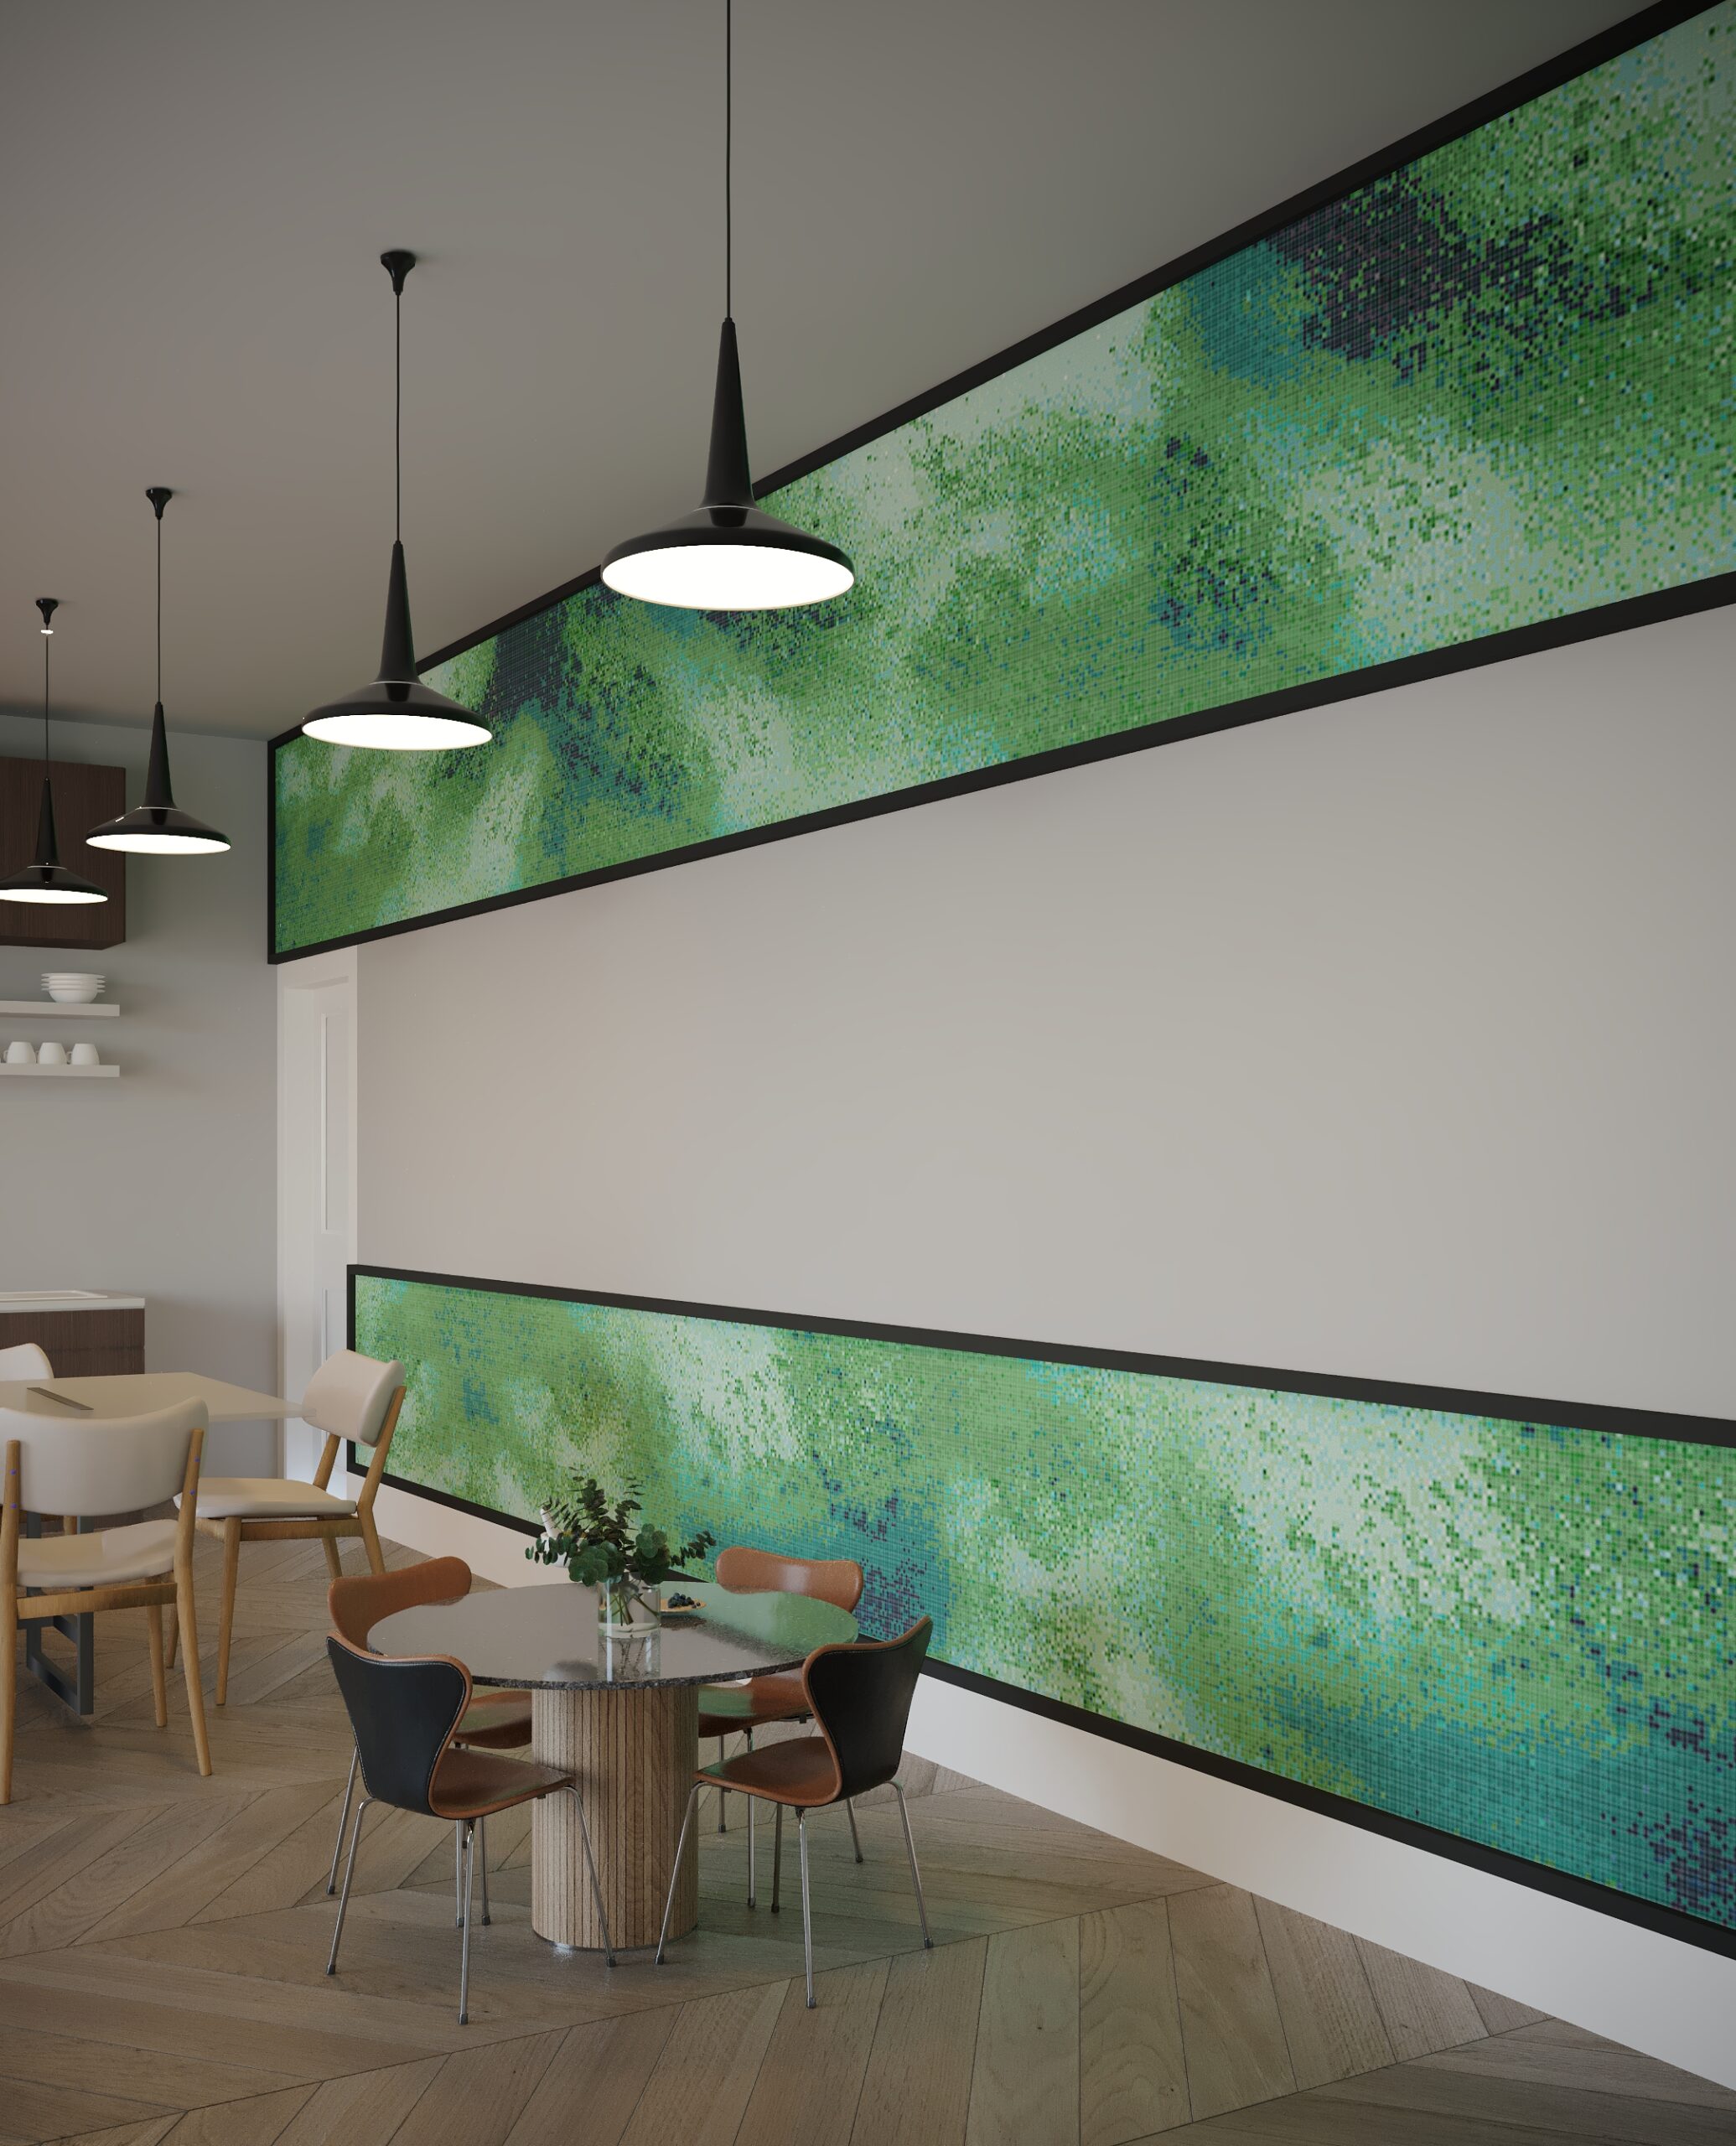 A modern dining area features three tables with chairs. The walls are adorned with vibrant green, mosaic art panels.